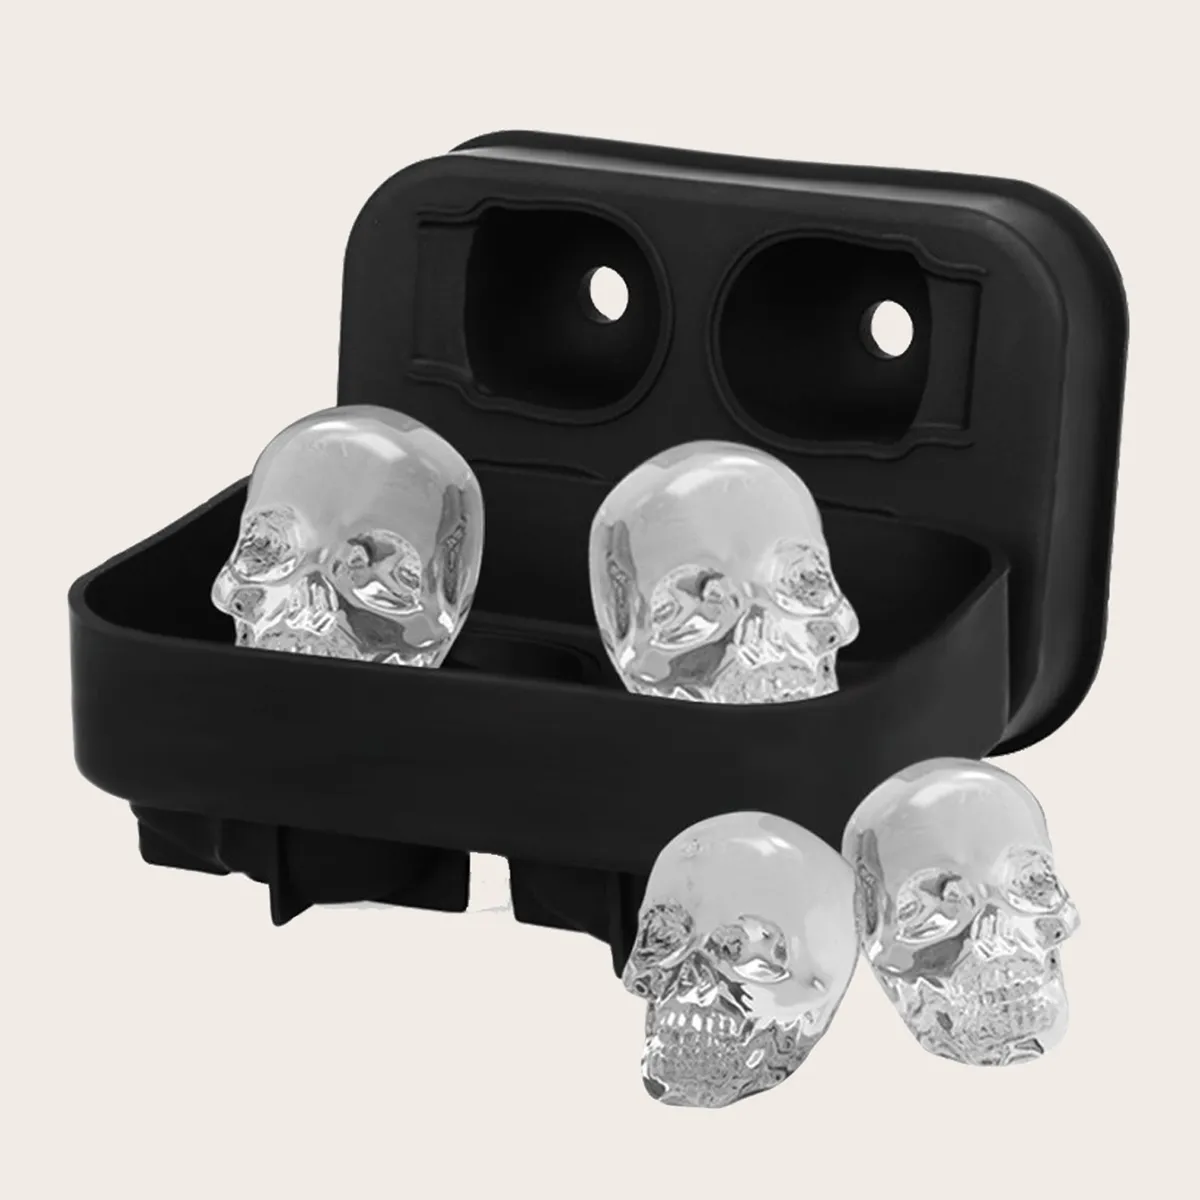 3D Skull Ice Cube Mold Whisky Beer Bartenders Ice Ball Silicone Mold Party Bar Tool